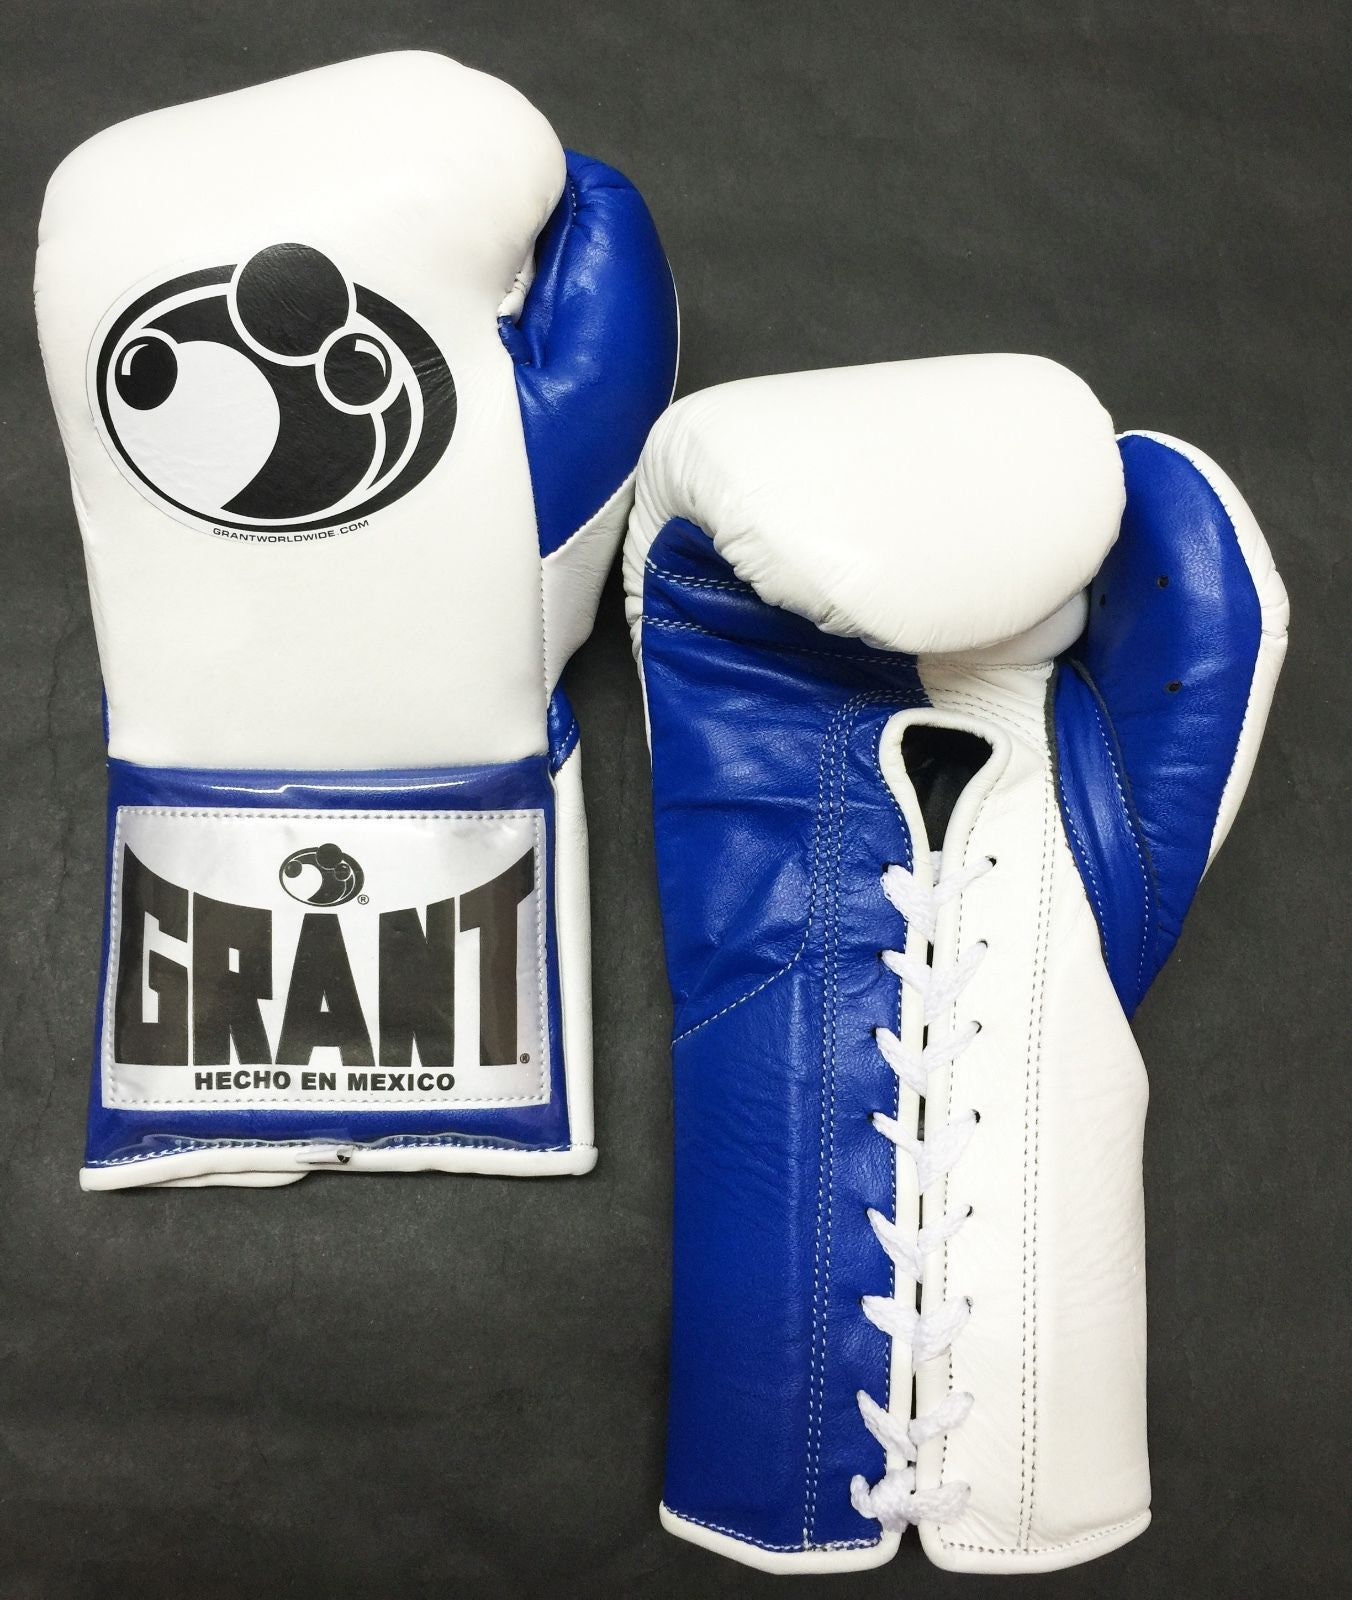 Toys & Games Sports & Outdoor Recreation Martial Arts & Boxing Boxing Gloves Customized Grant Boxing Gloves 